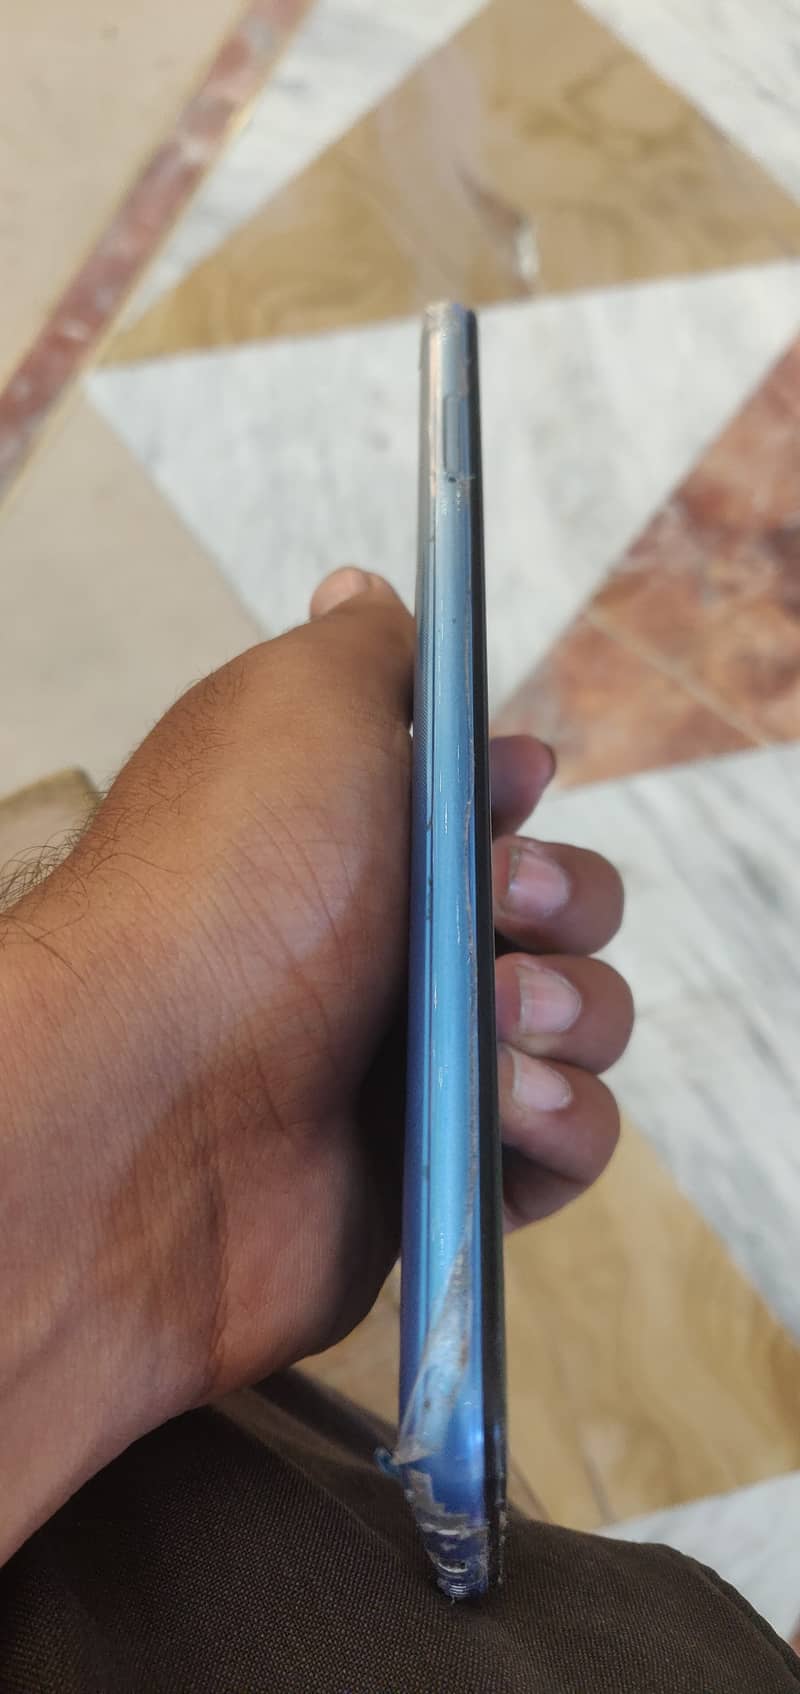 Infinix note 8 i condition 10/9 6/128 Smart phone 3